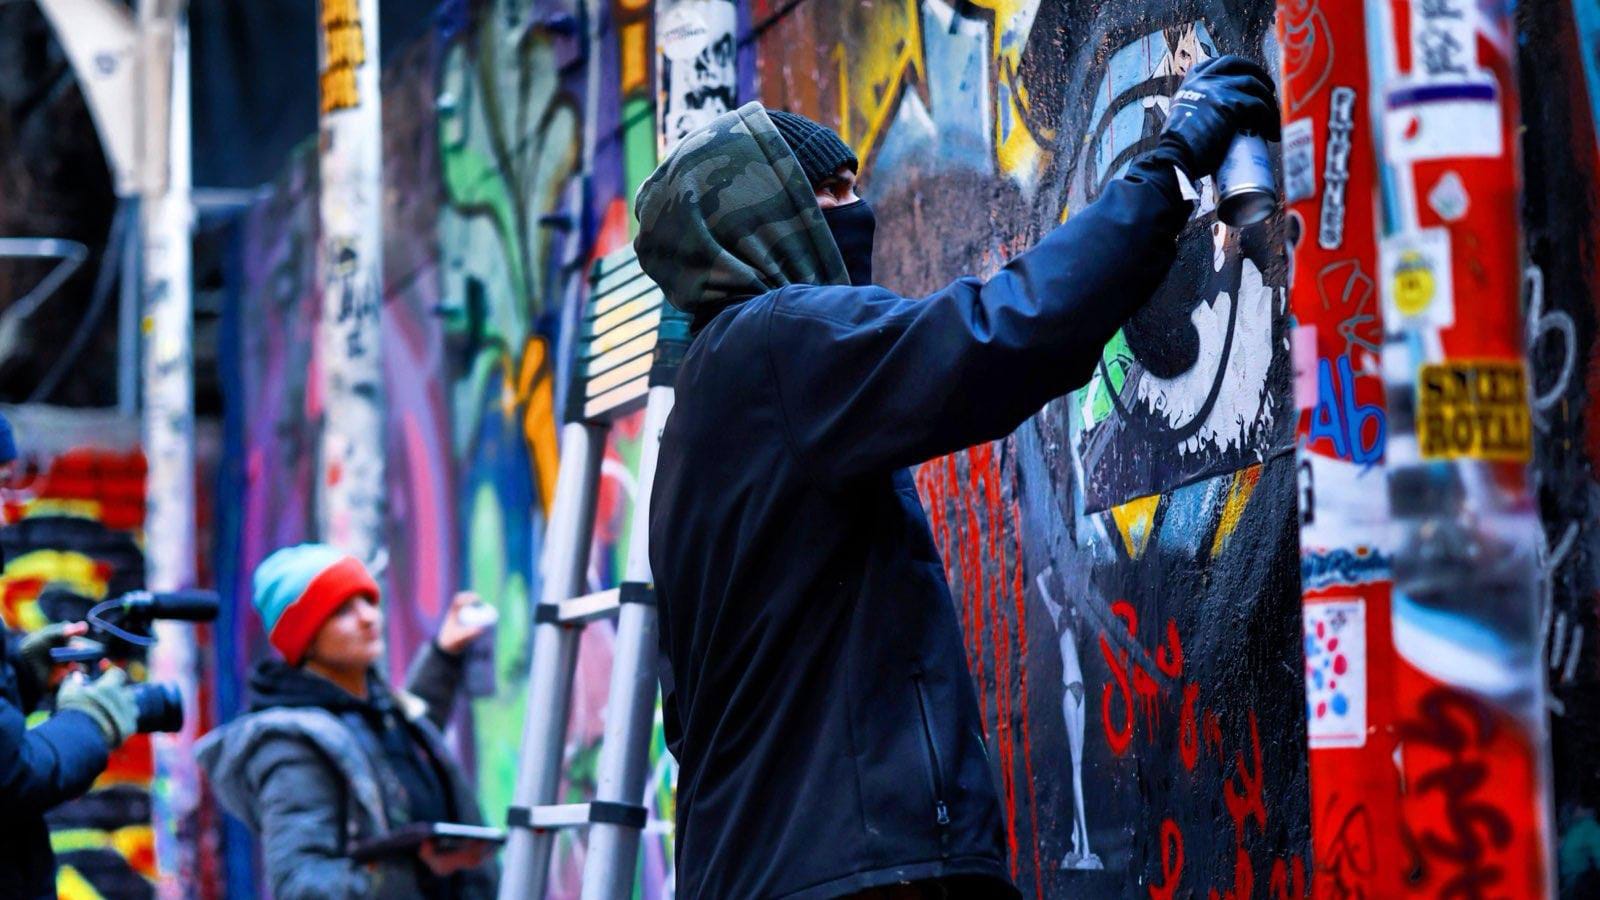 The artist Hugus in a camouflage hood, dark jacket and black gloves, at work on a colorful mural